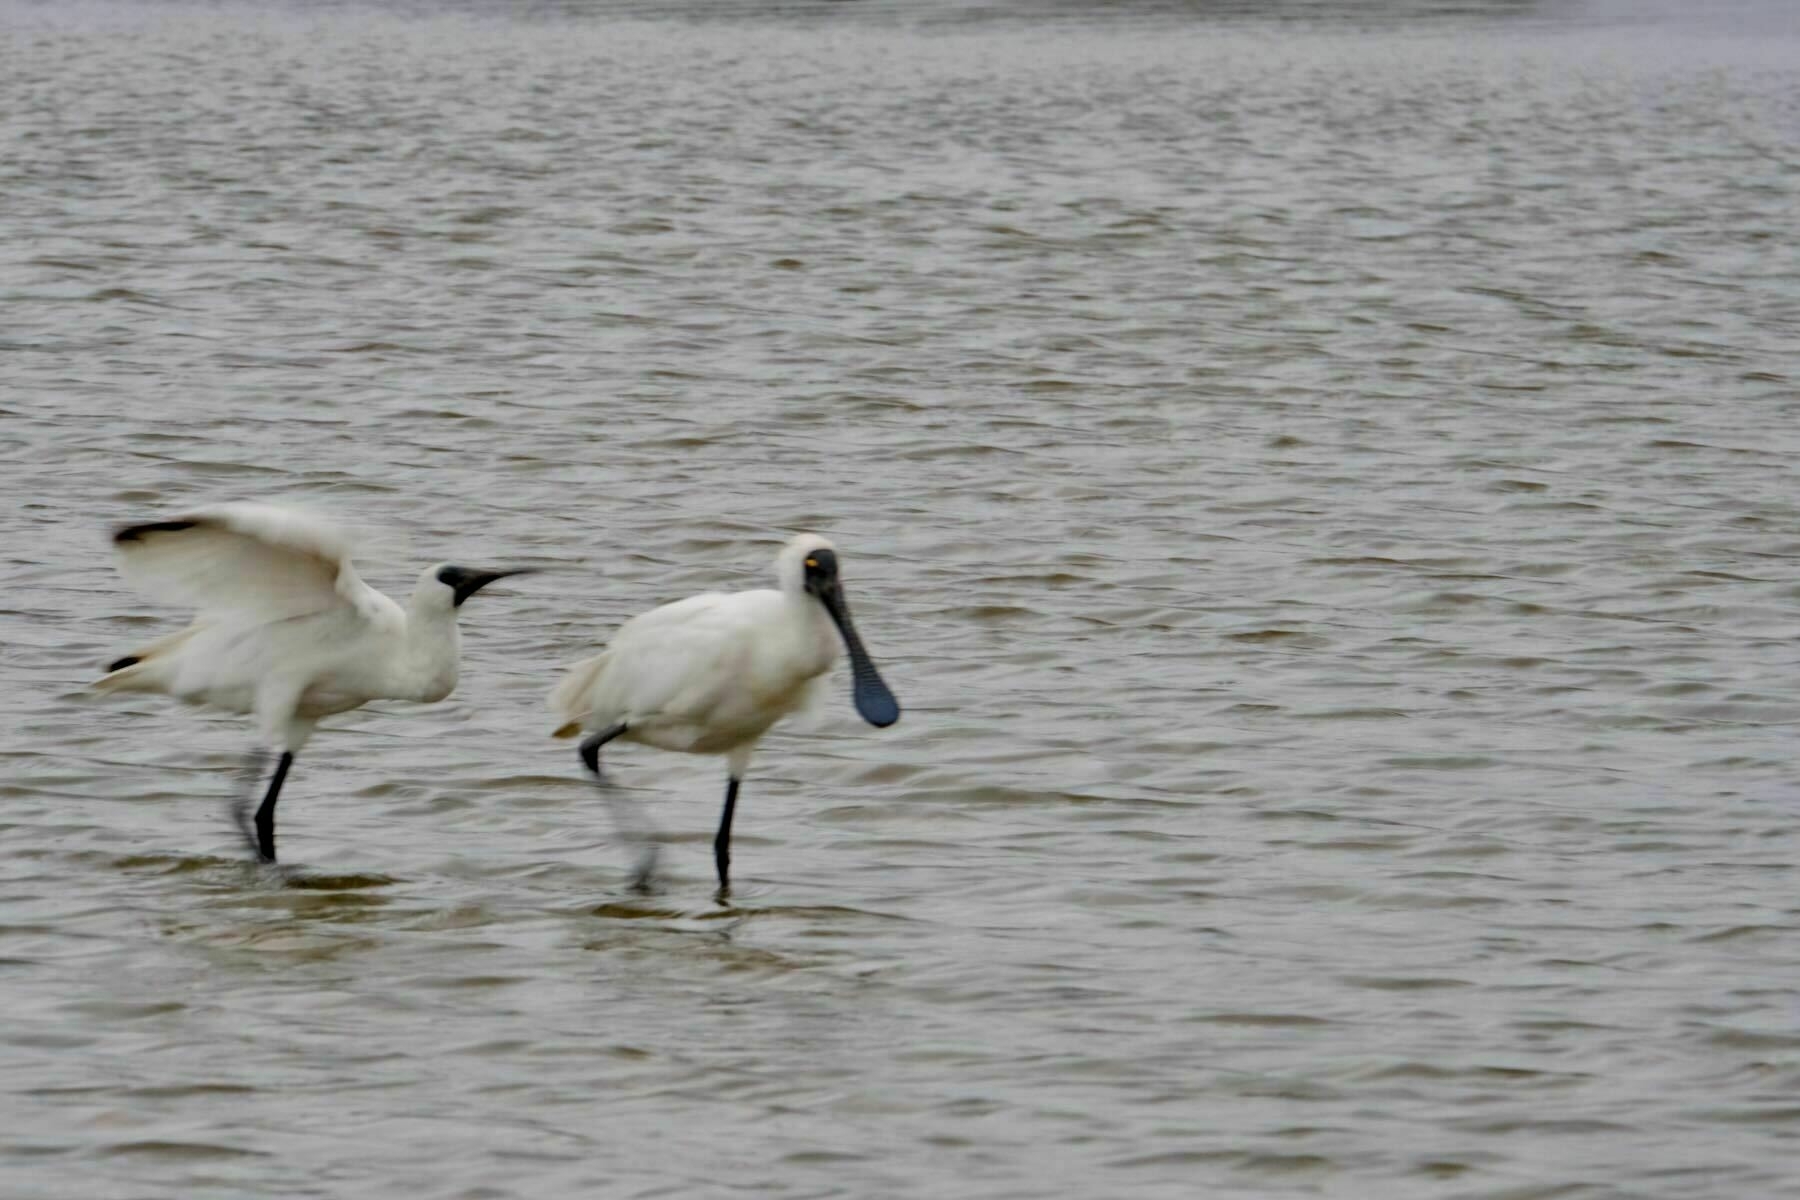 Two Spoonbills, in shallow water. A juvenile flaps its wings towards an adult. 